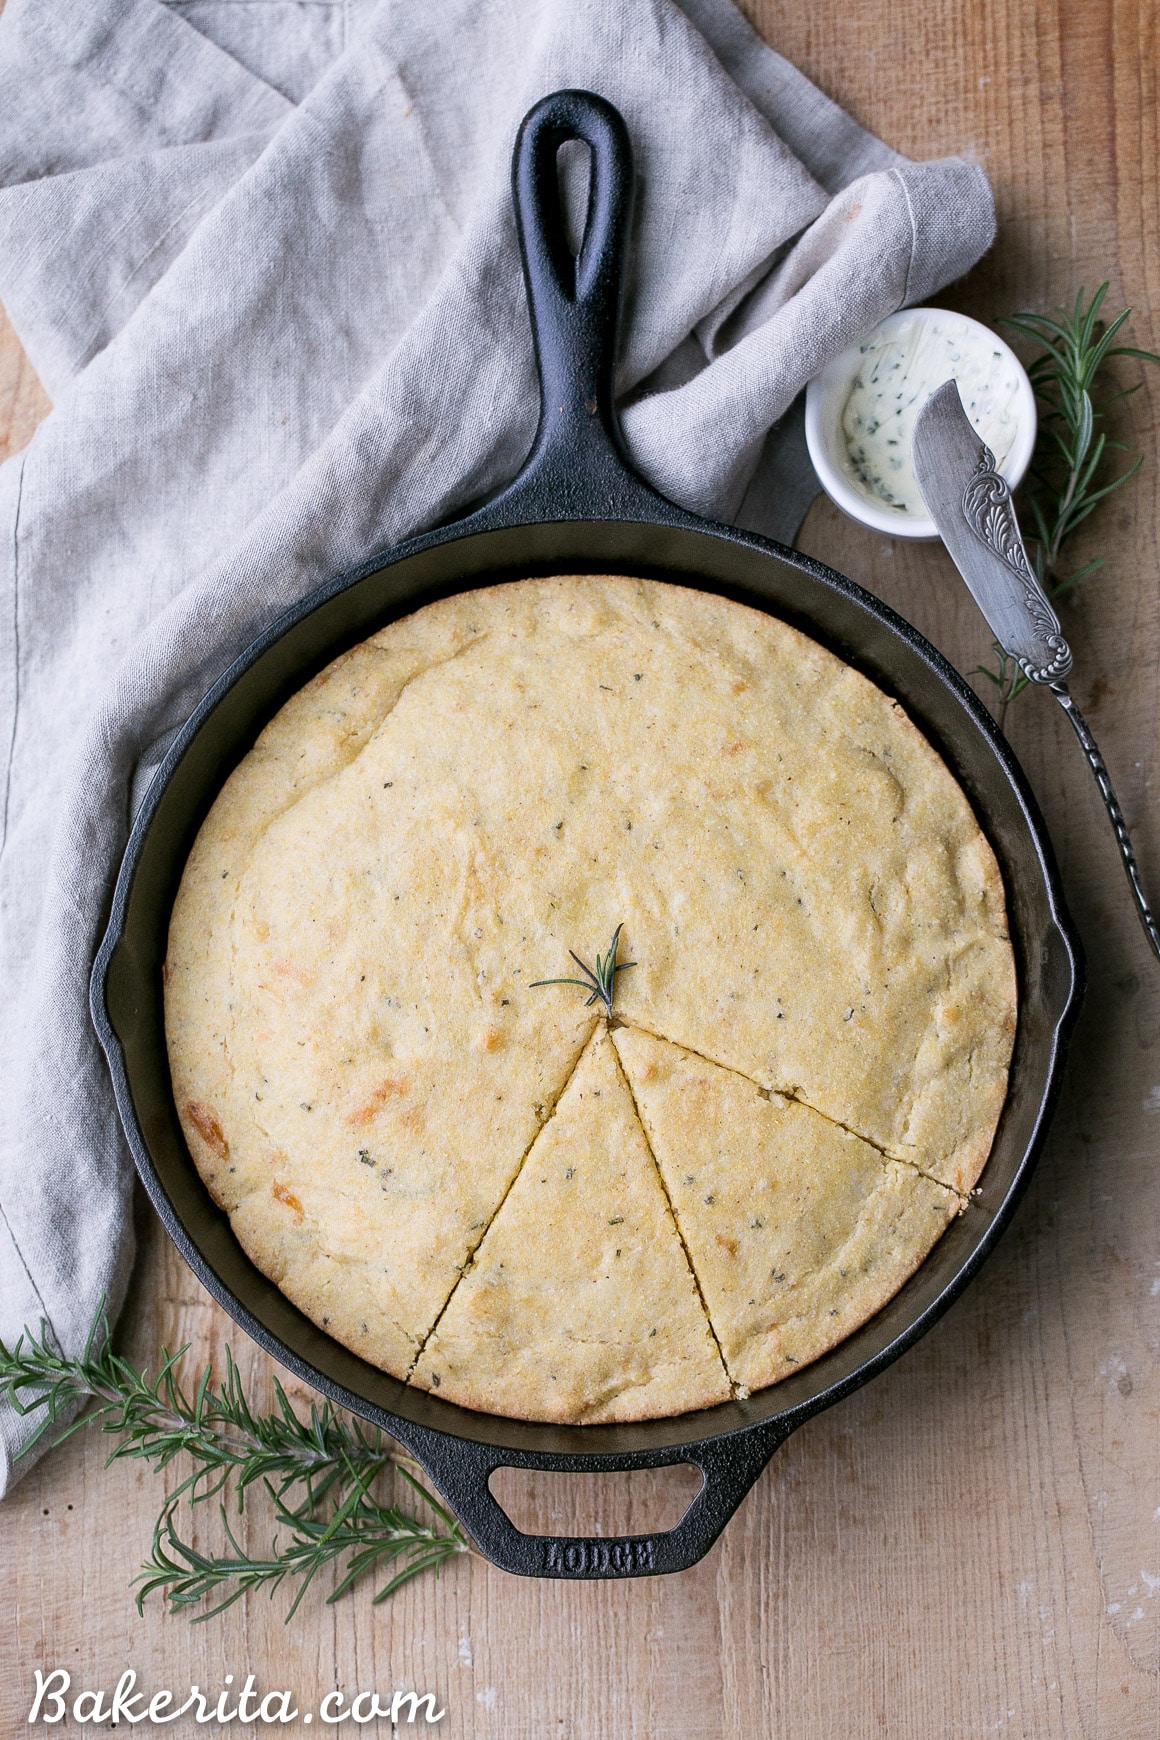 This Gluten Free Asiago Rosemary Cornbread is an easy, savory cornbread that's moist and flavorful. A slice of this gluten-free cornbread is perfect with a slather of butter or served with a bowl of soup!